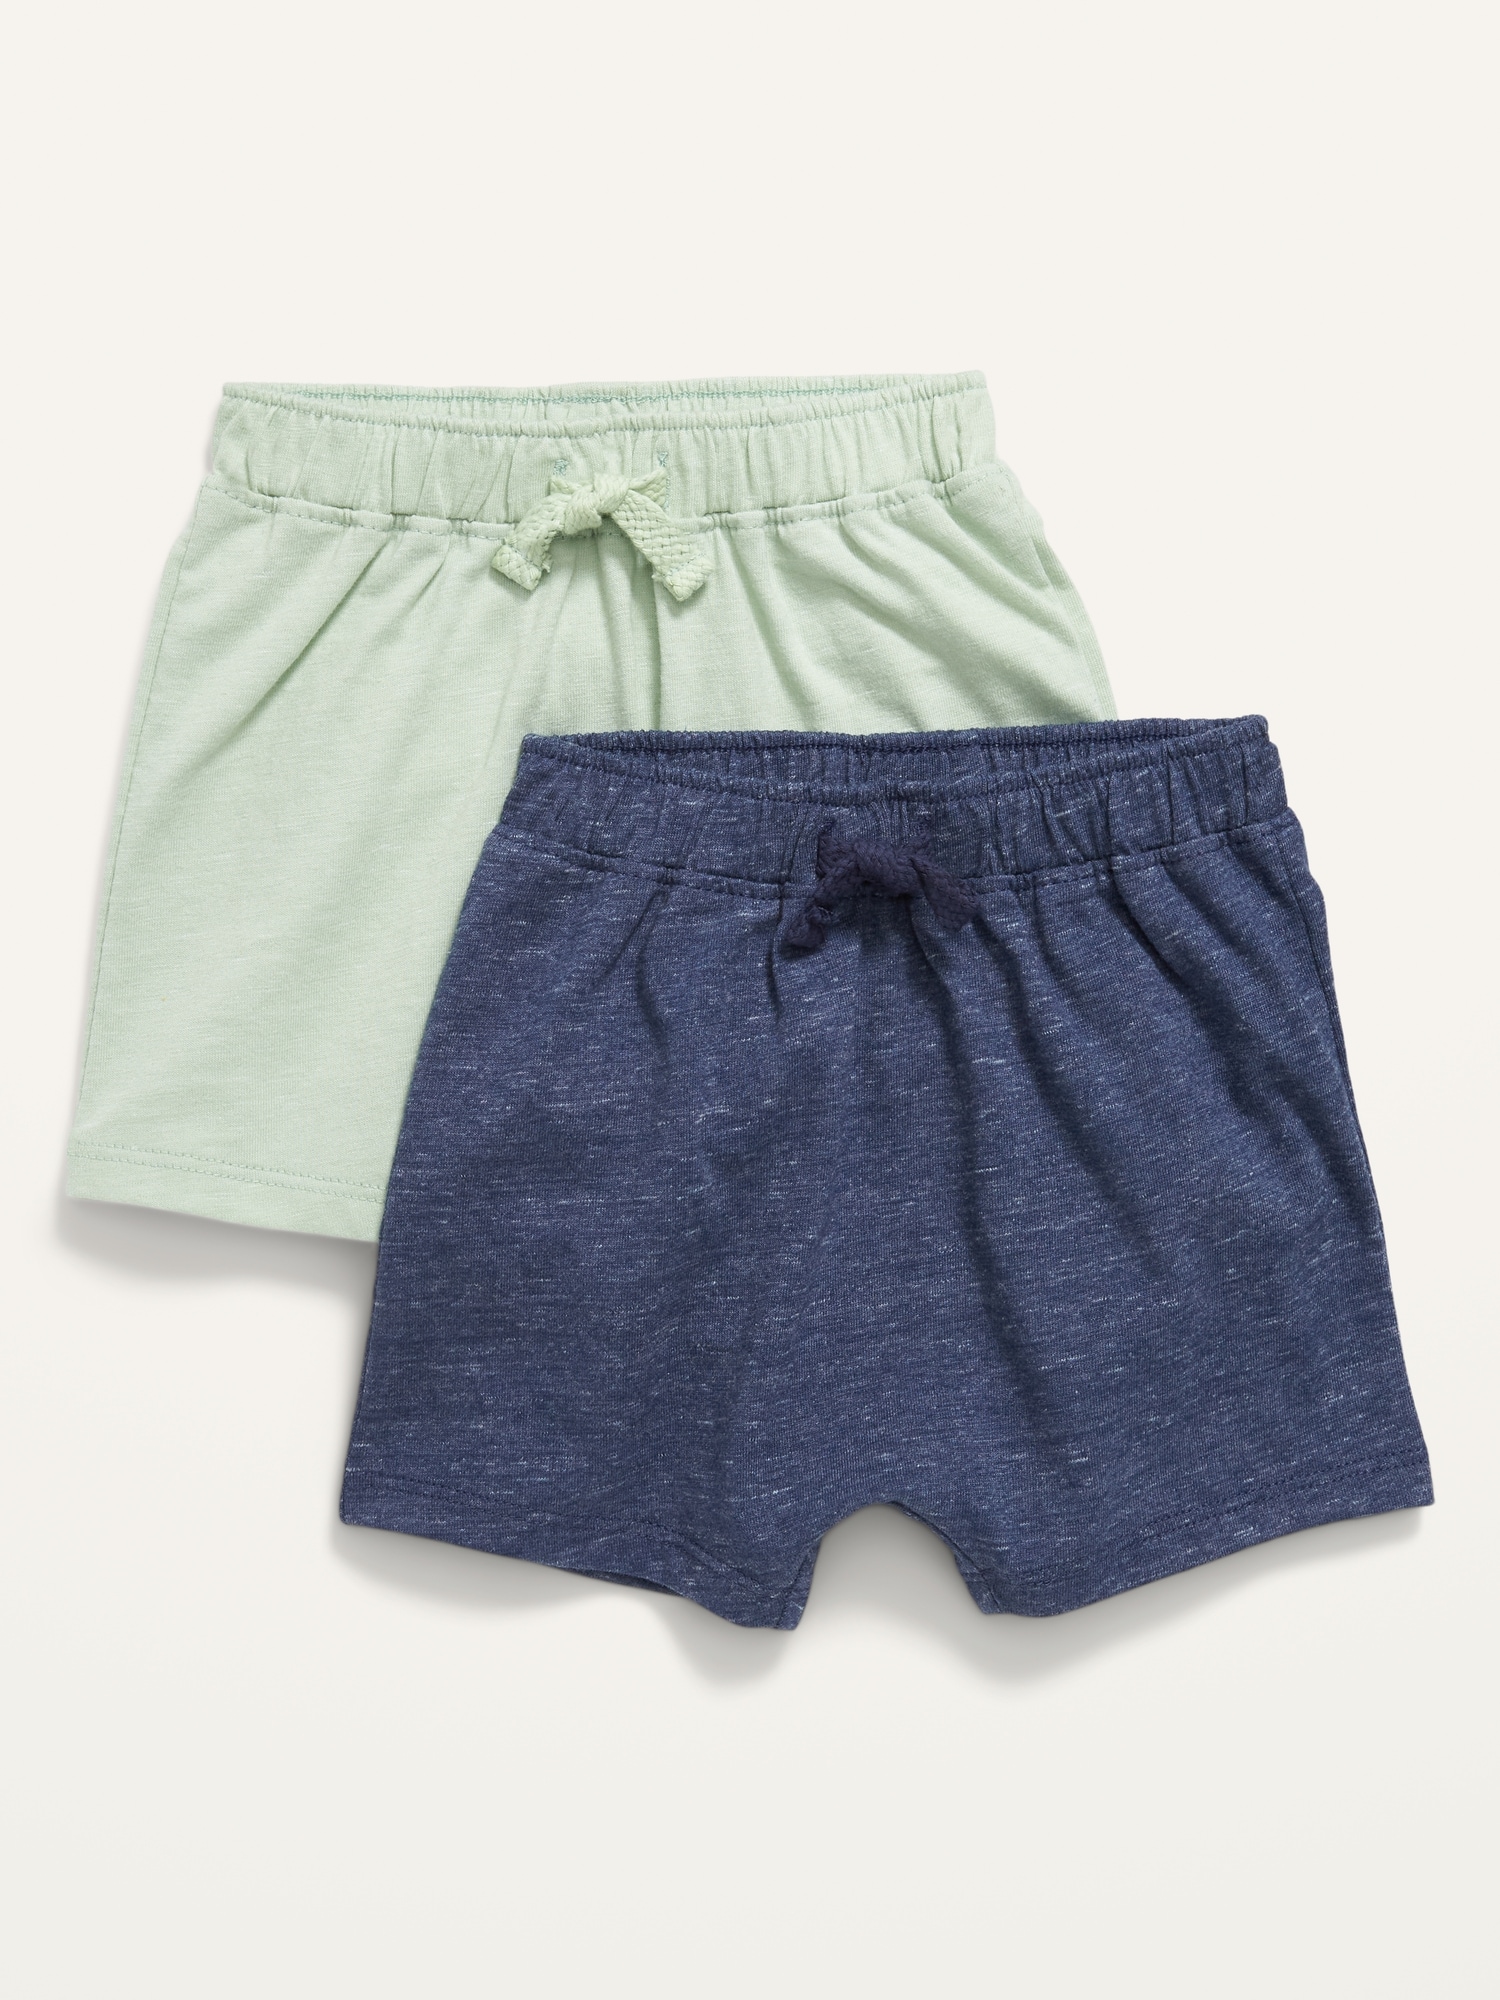 Unisex 2-Pack U-Shaped Jersey-Knit Shorts for Baby